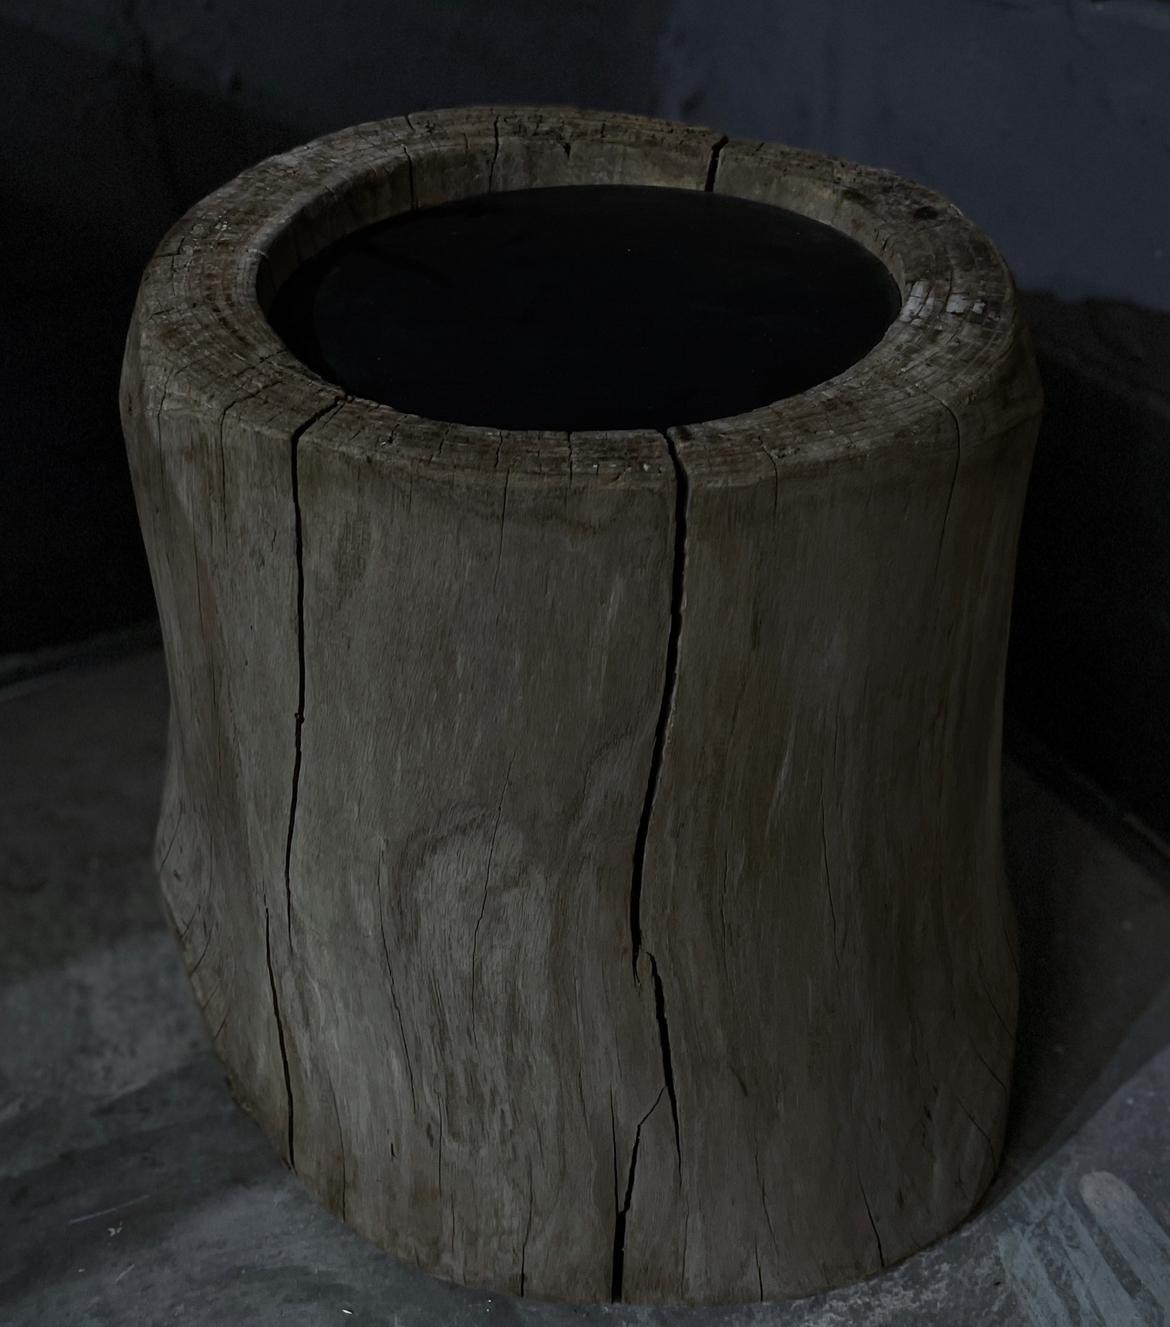 This Japanese side table is composed of an antique base made from an ancient Japanese Zelkova wood Usu . The natural texture and patina give this piece an earth feel that one can usually only find in nature. The piece is completed off by a new wood